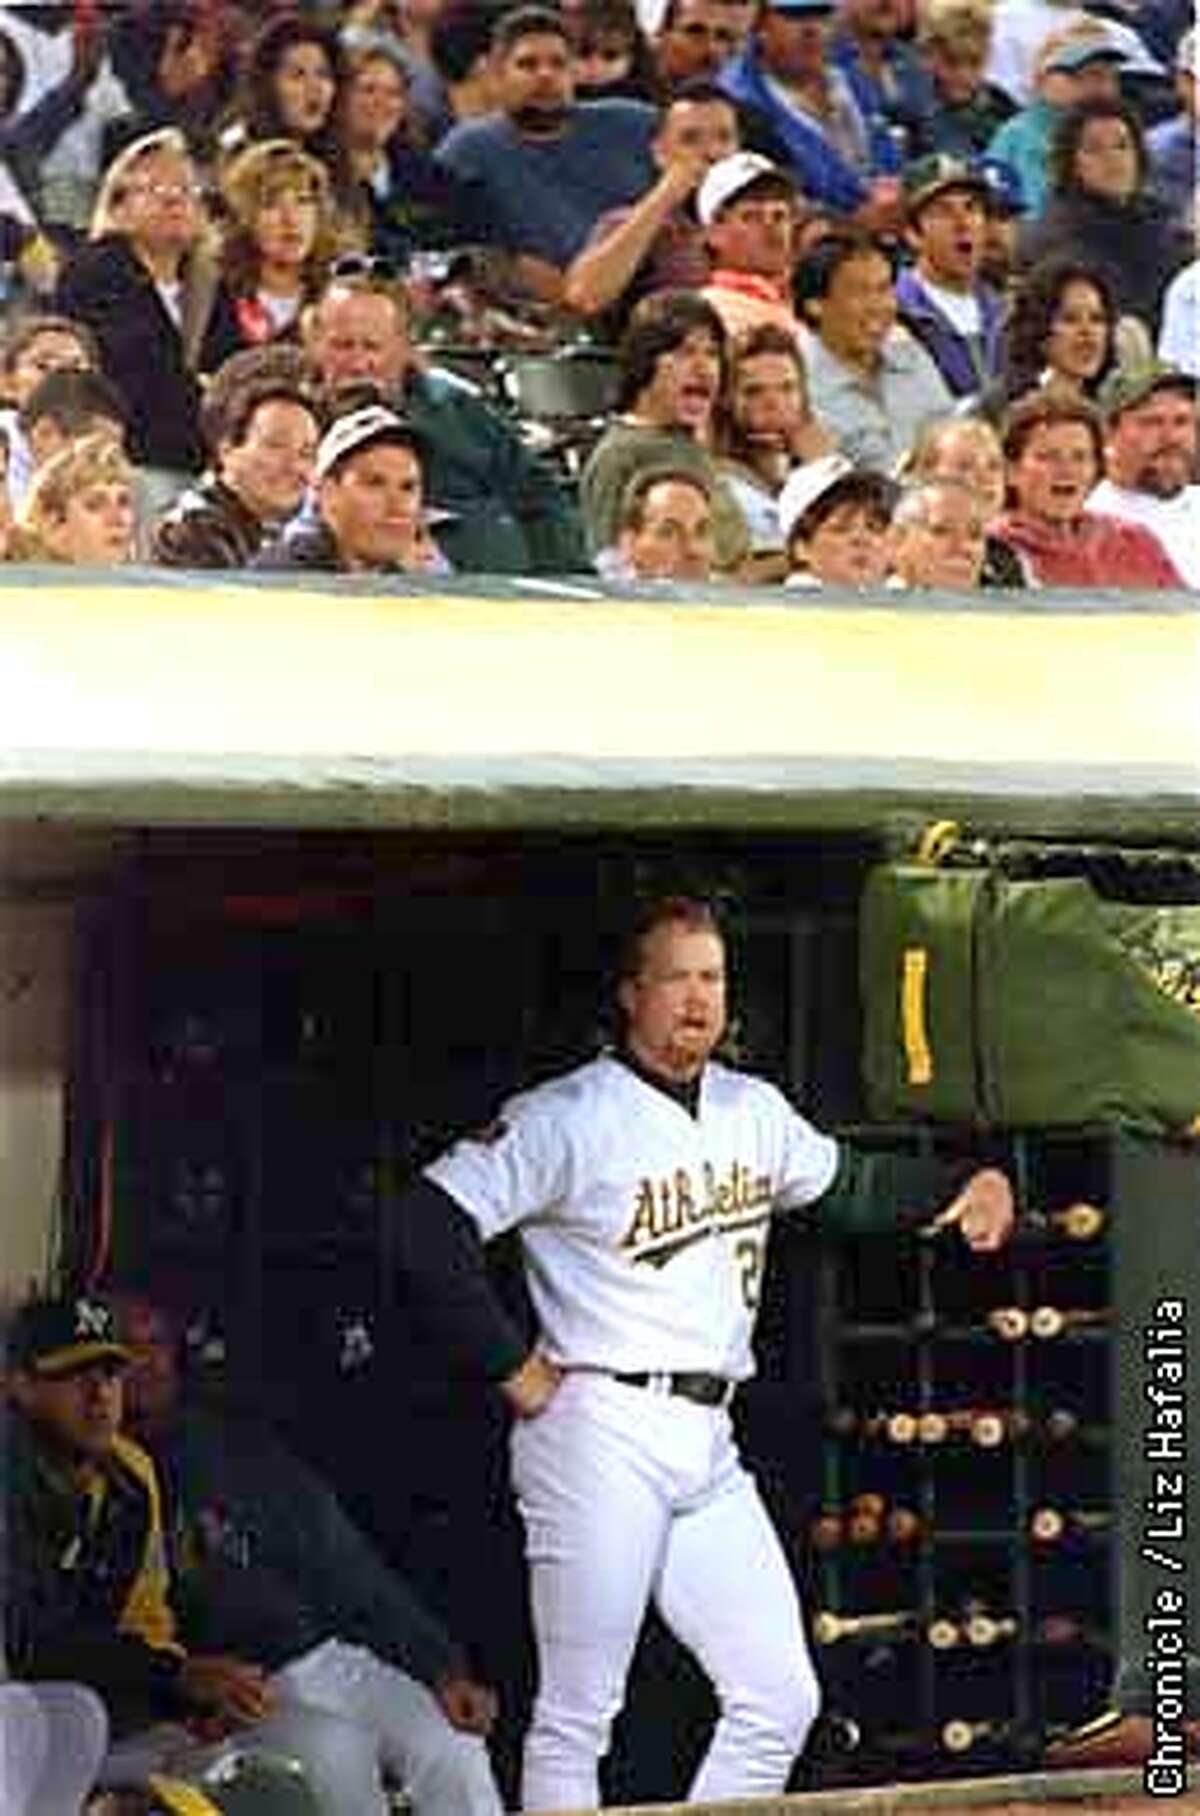 A's first baseman Mark McGwire watches game from the dugout. Photo by Liz Hafalia